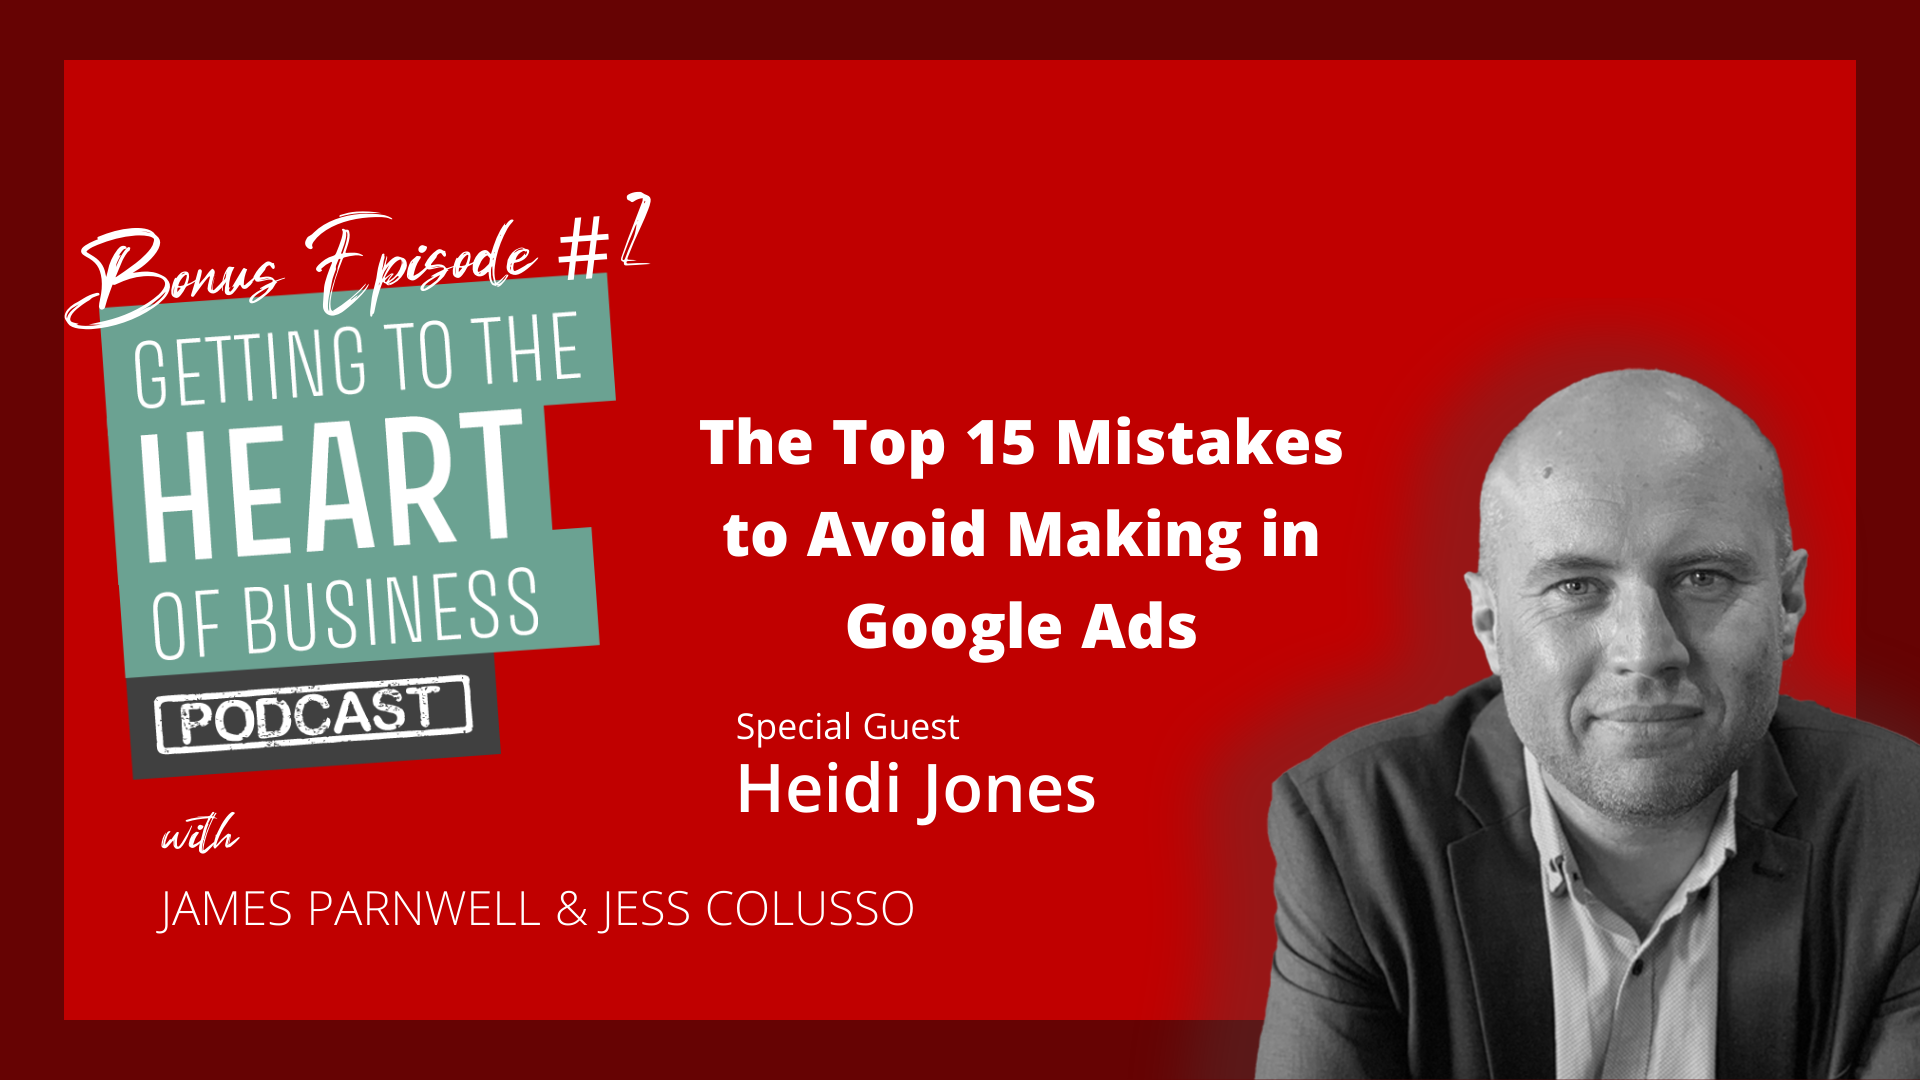 The Top 15 Mistakes to Avoid Making in Google Ads